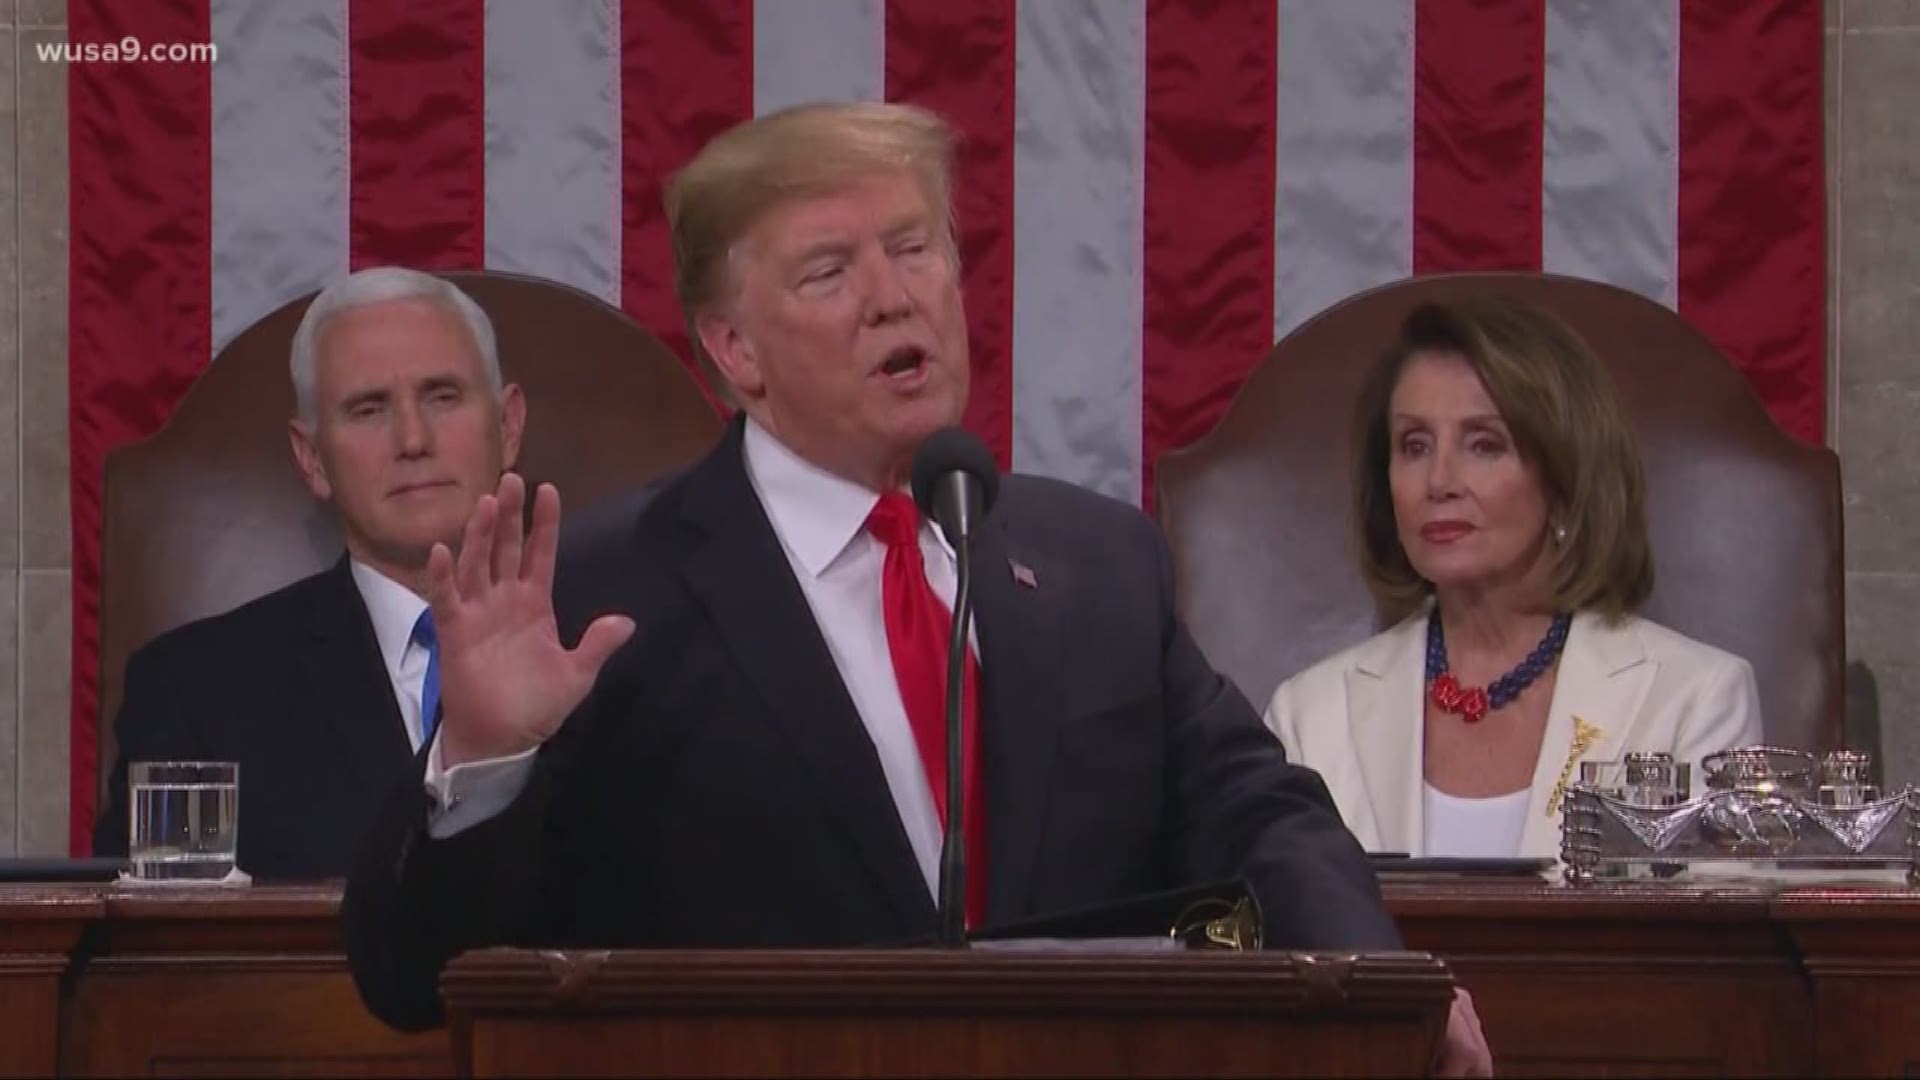 Here's what was verified as true and false during President Trump's State of the Union address on Tuesday.